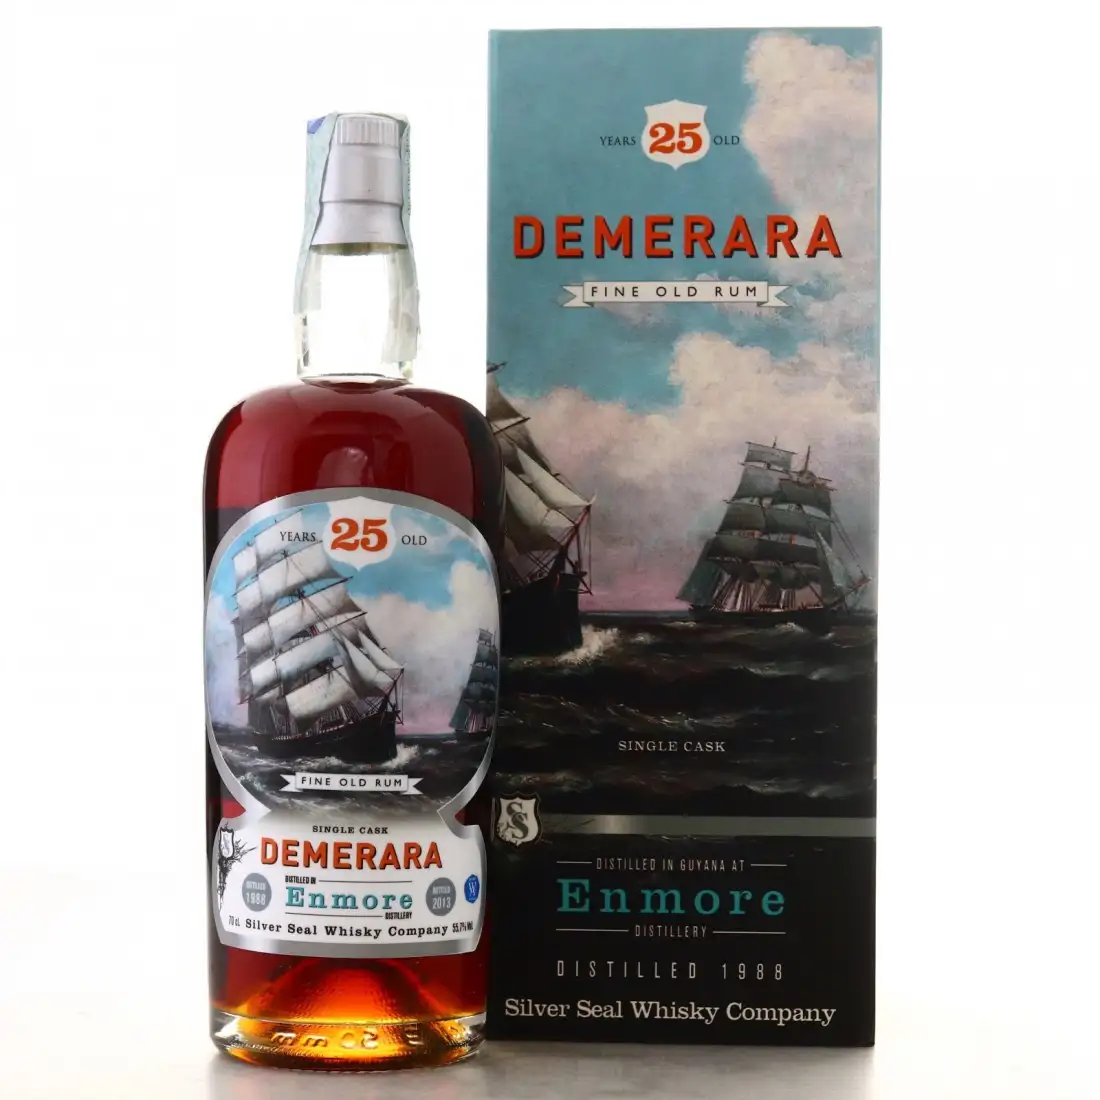 Image of the front of the bottle of the rum Demerara (Blue Label)